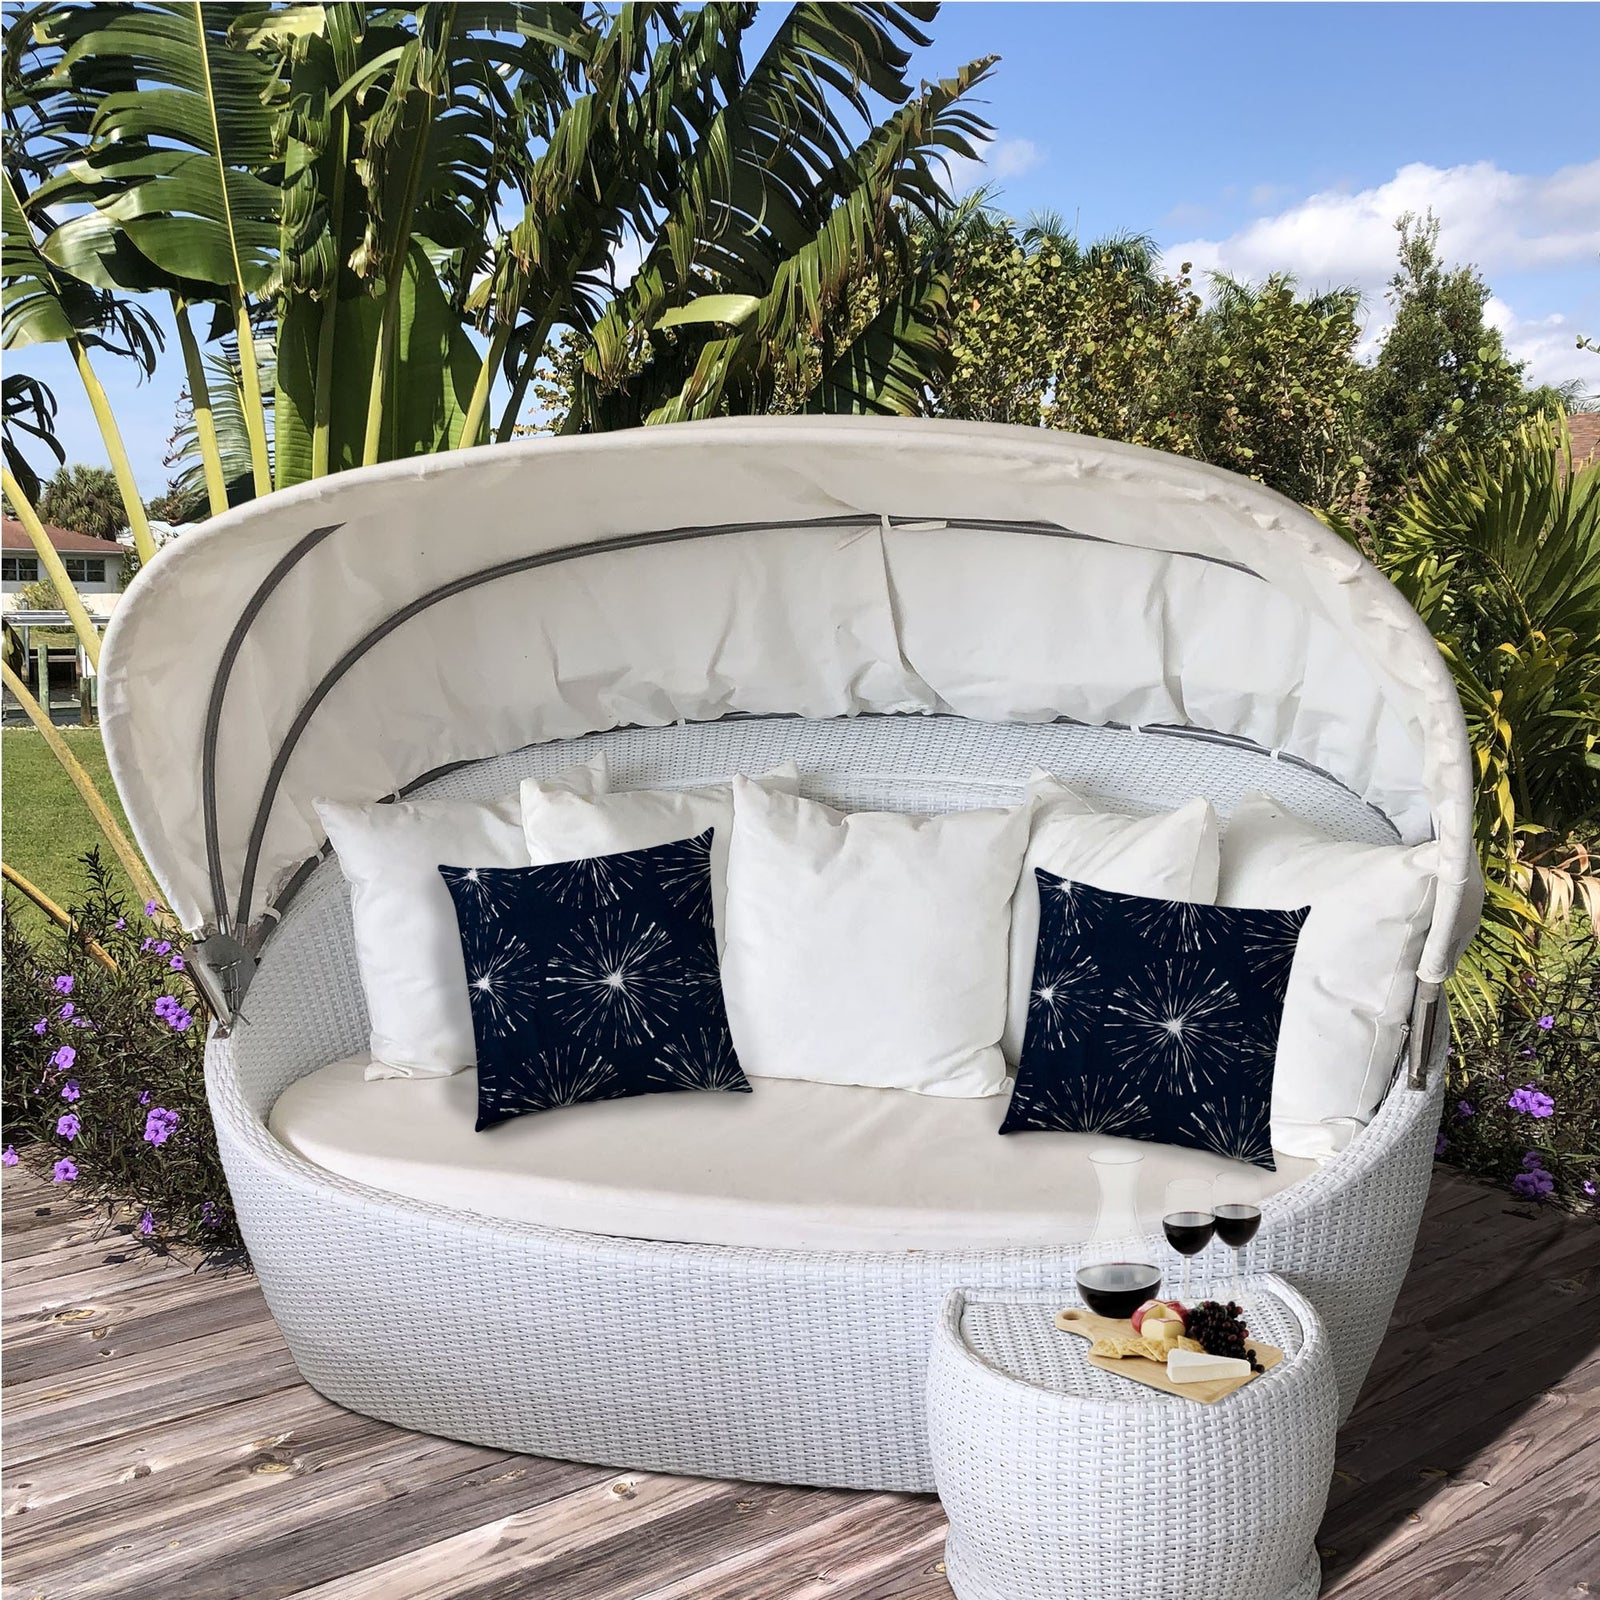 17" X 17" Navy Blue And White Blown Seam Floral Lumbar Indoor Outdoor Pillow